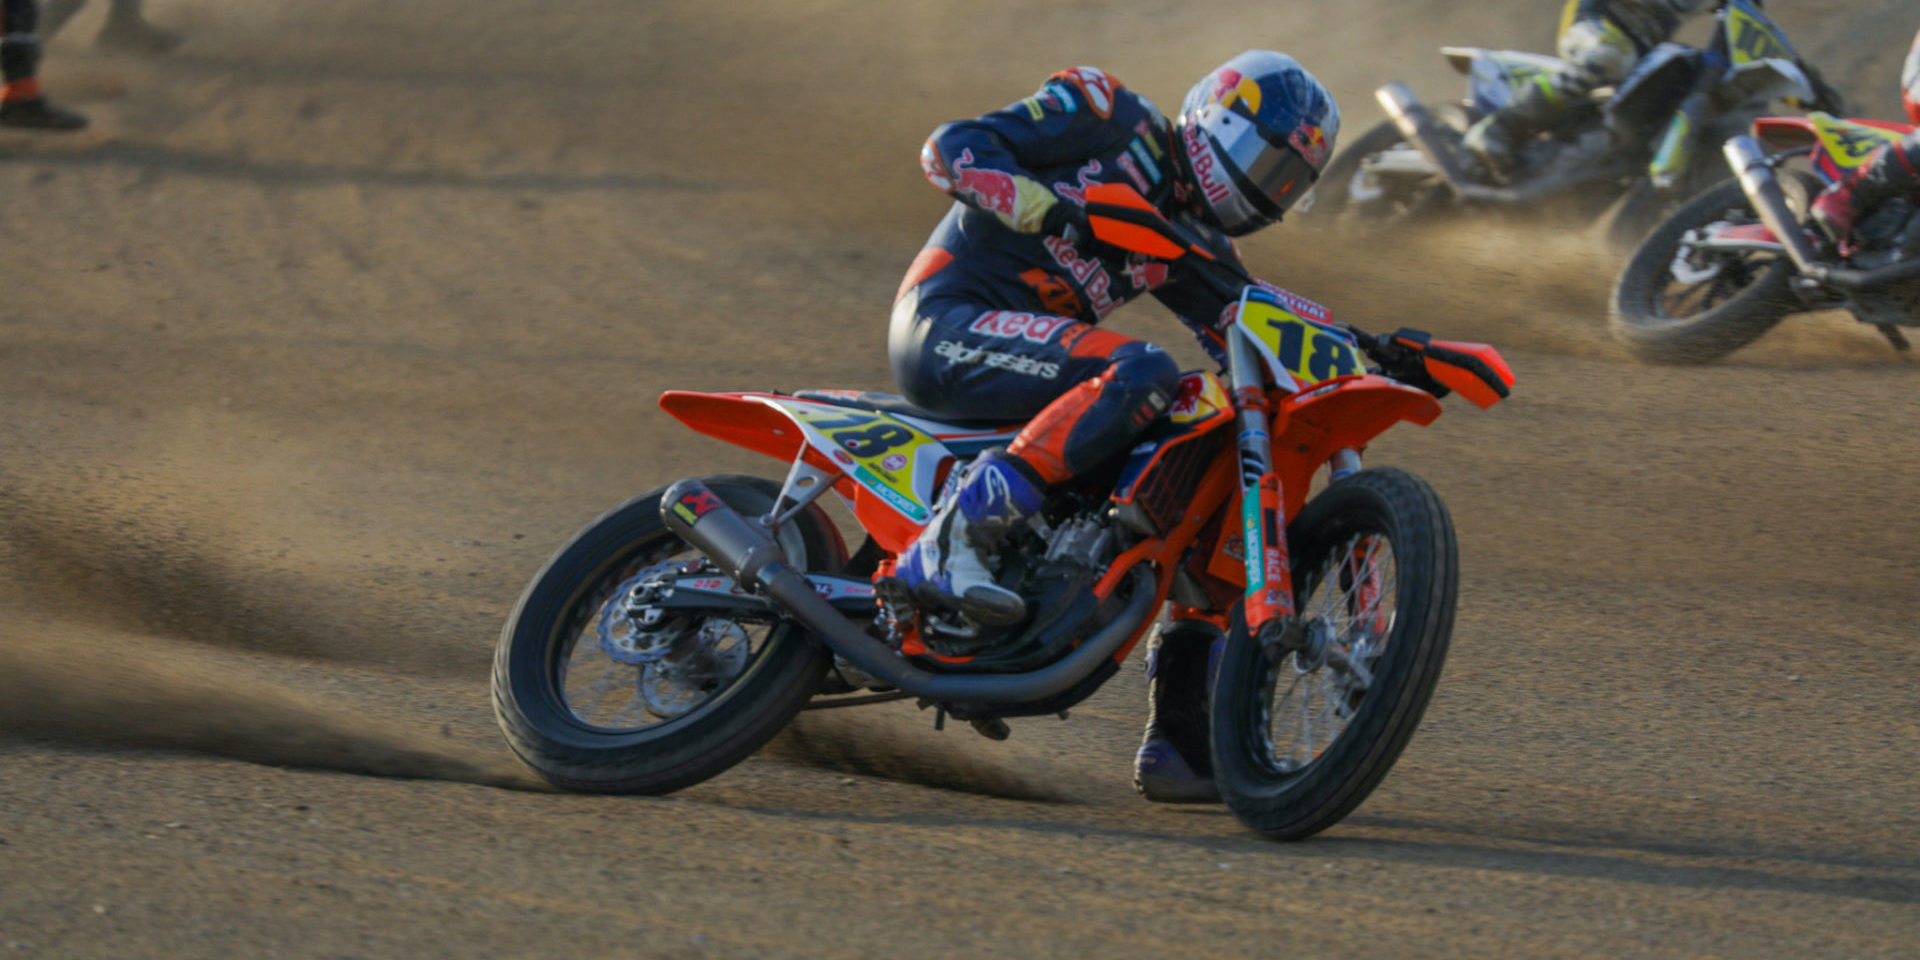 Max Whale (18) at speed at the Lima Half-Mile. Photo courtesy KTM Factory Racing.